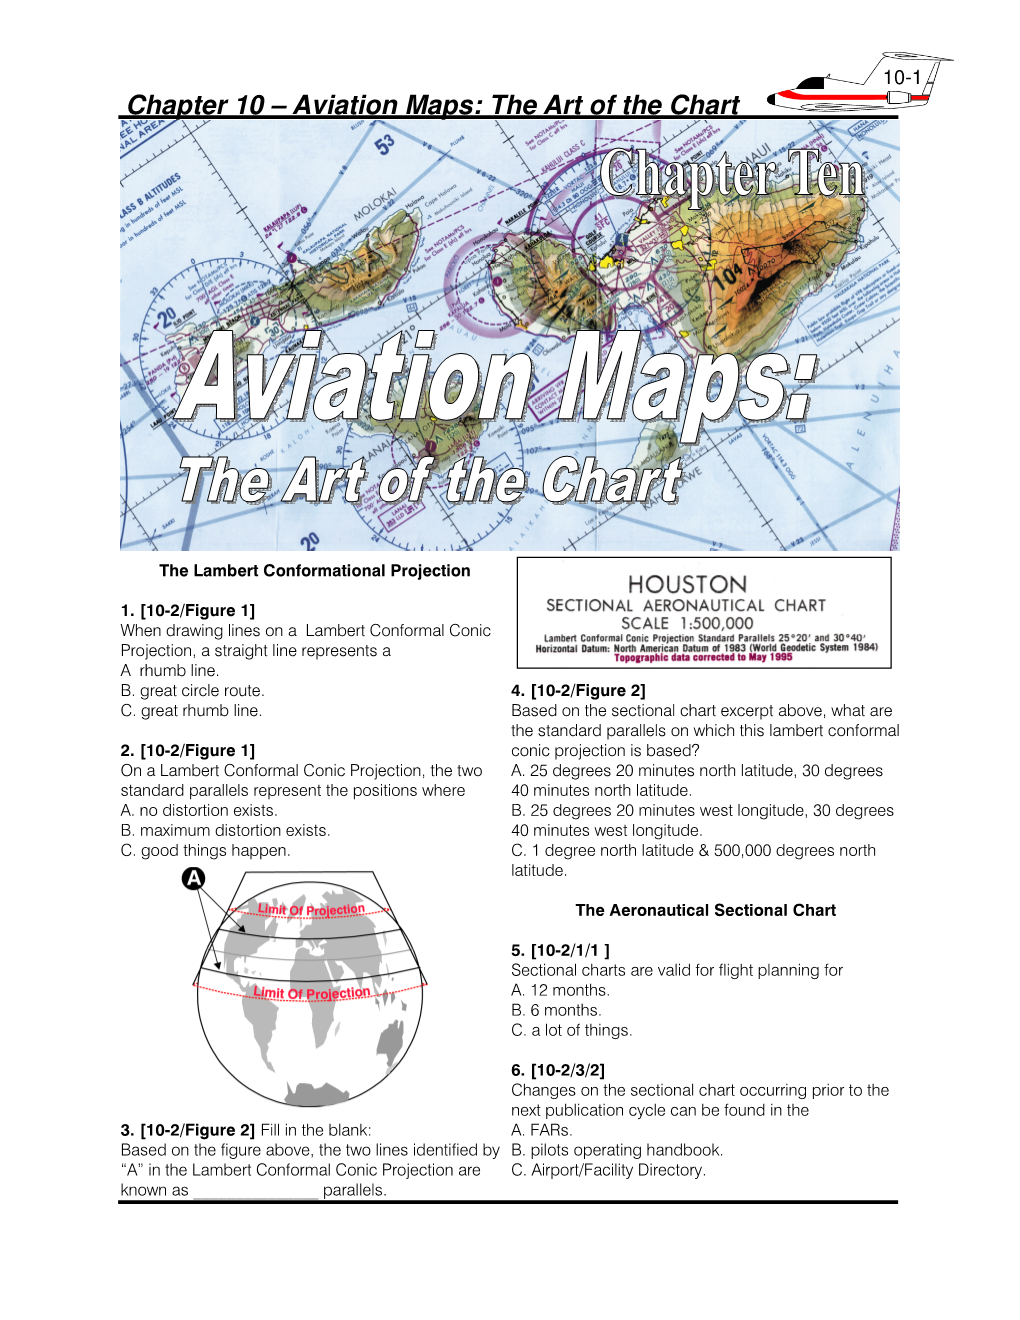 Chapter 10 – Aviation Maps: the Art of the Chart